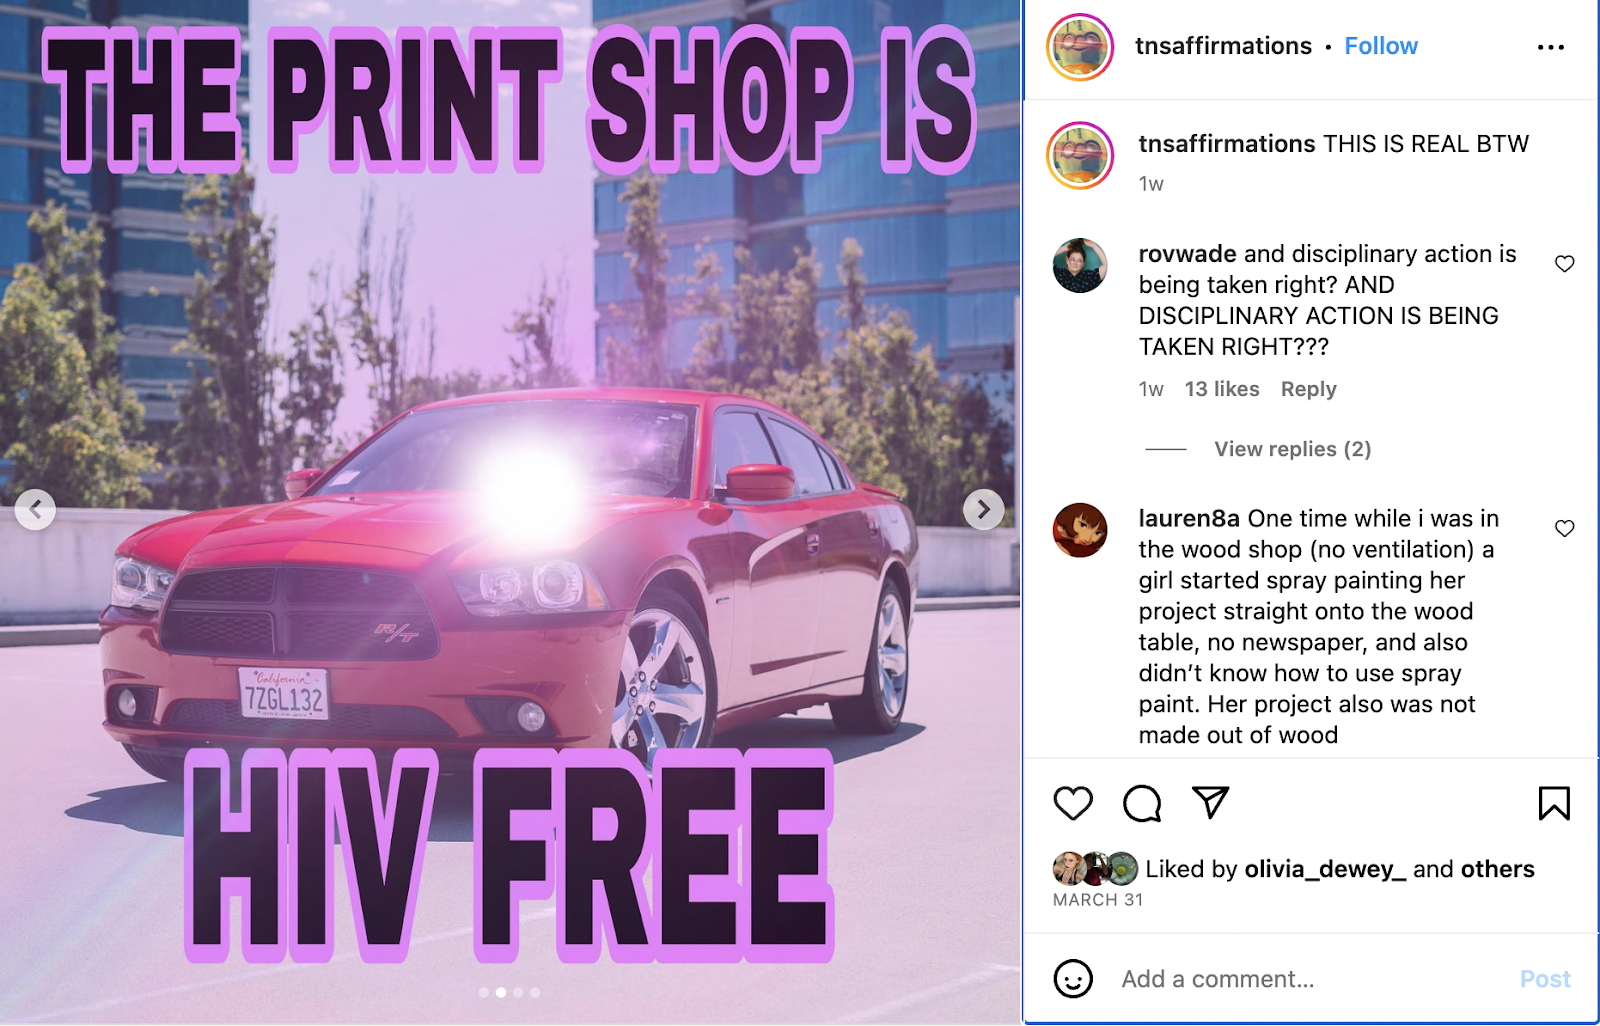 Instagram post, with an overly edited photo of a car, text is typed out on top of the image stating “The print shop is HIV free”